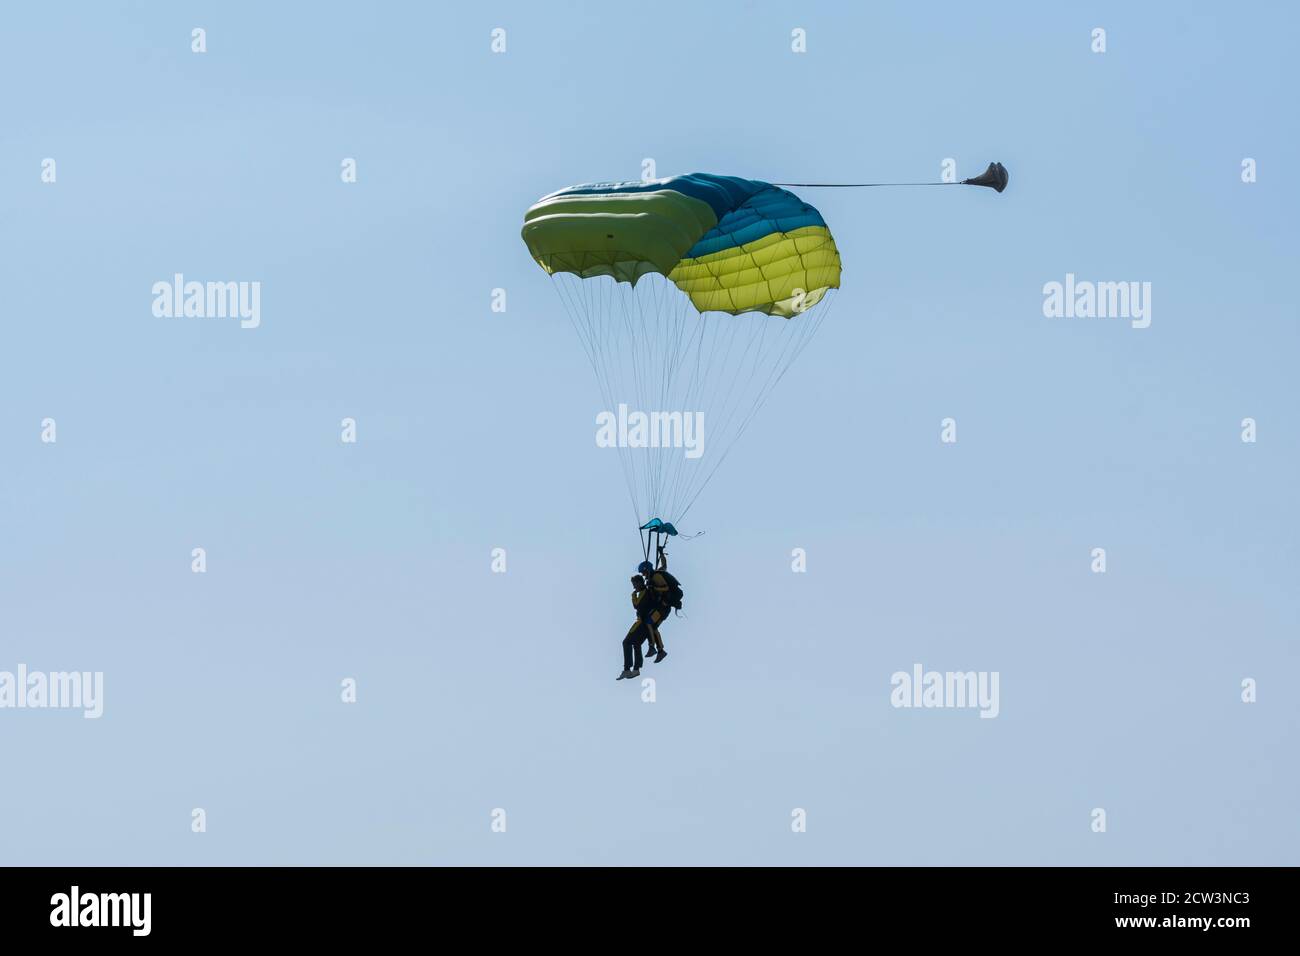 Tandem parachute jump. Silhouette of skydiver flying in blue clear sky. Concepts of extreme sport and adrenaline. Stock Photo